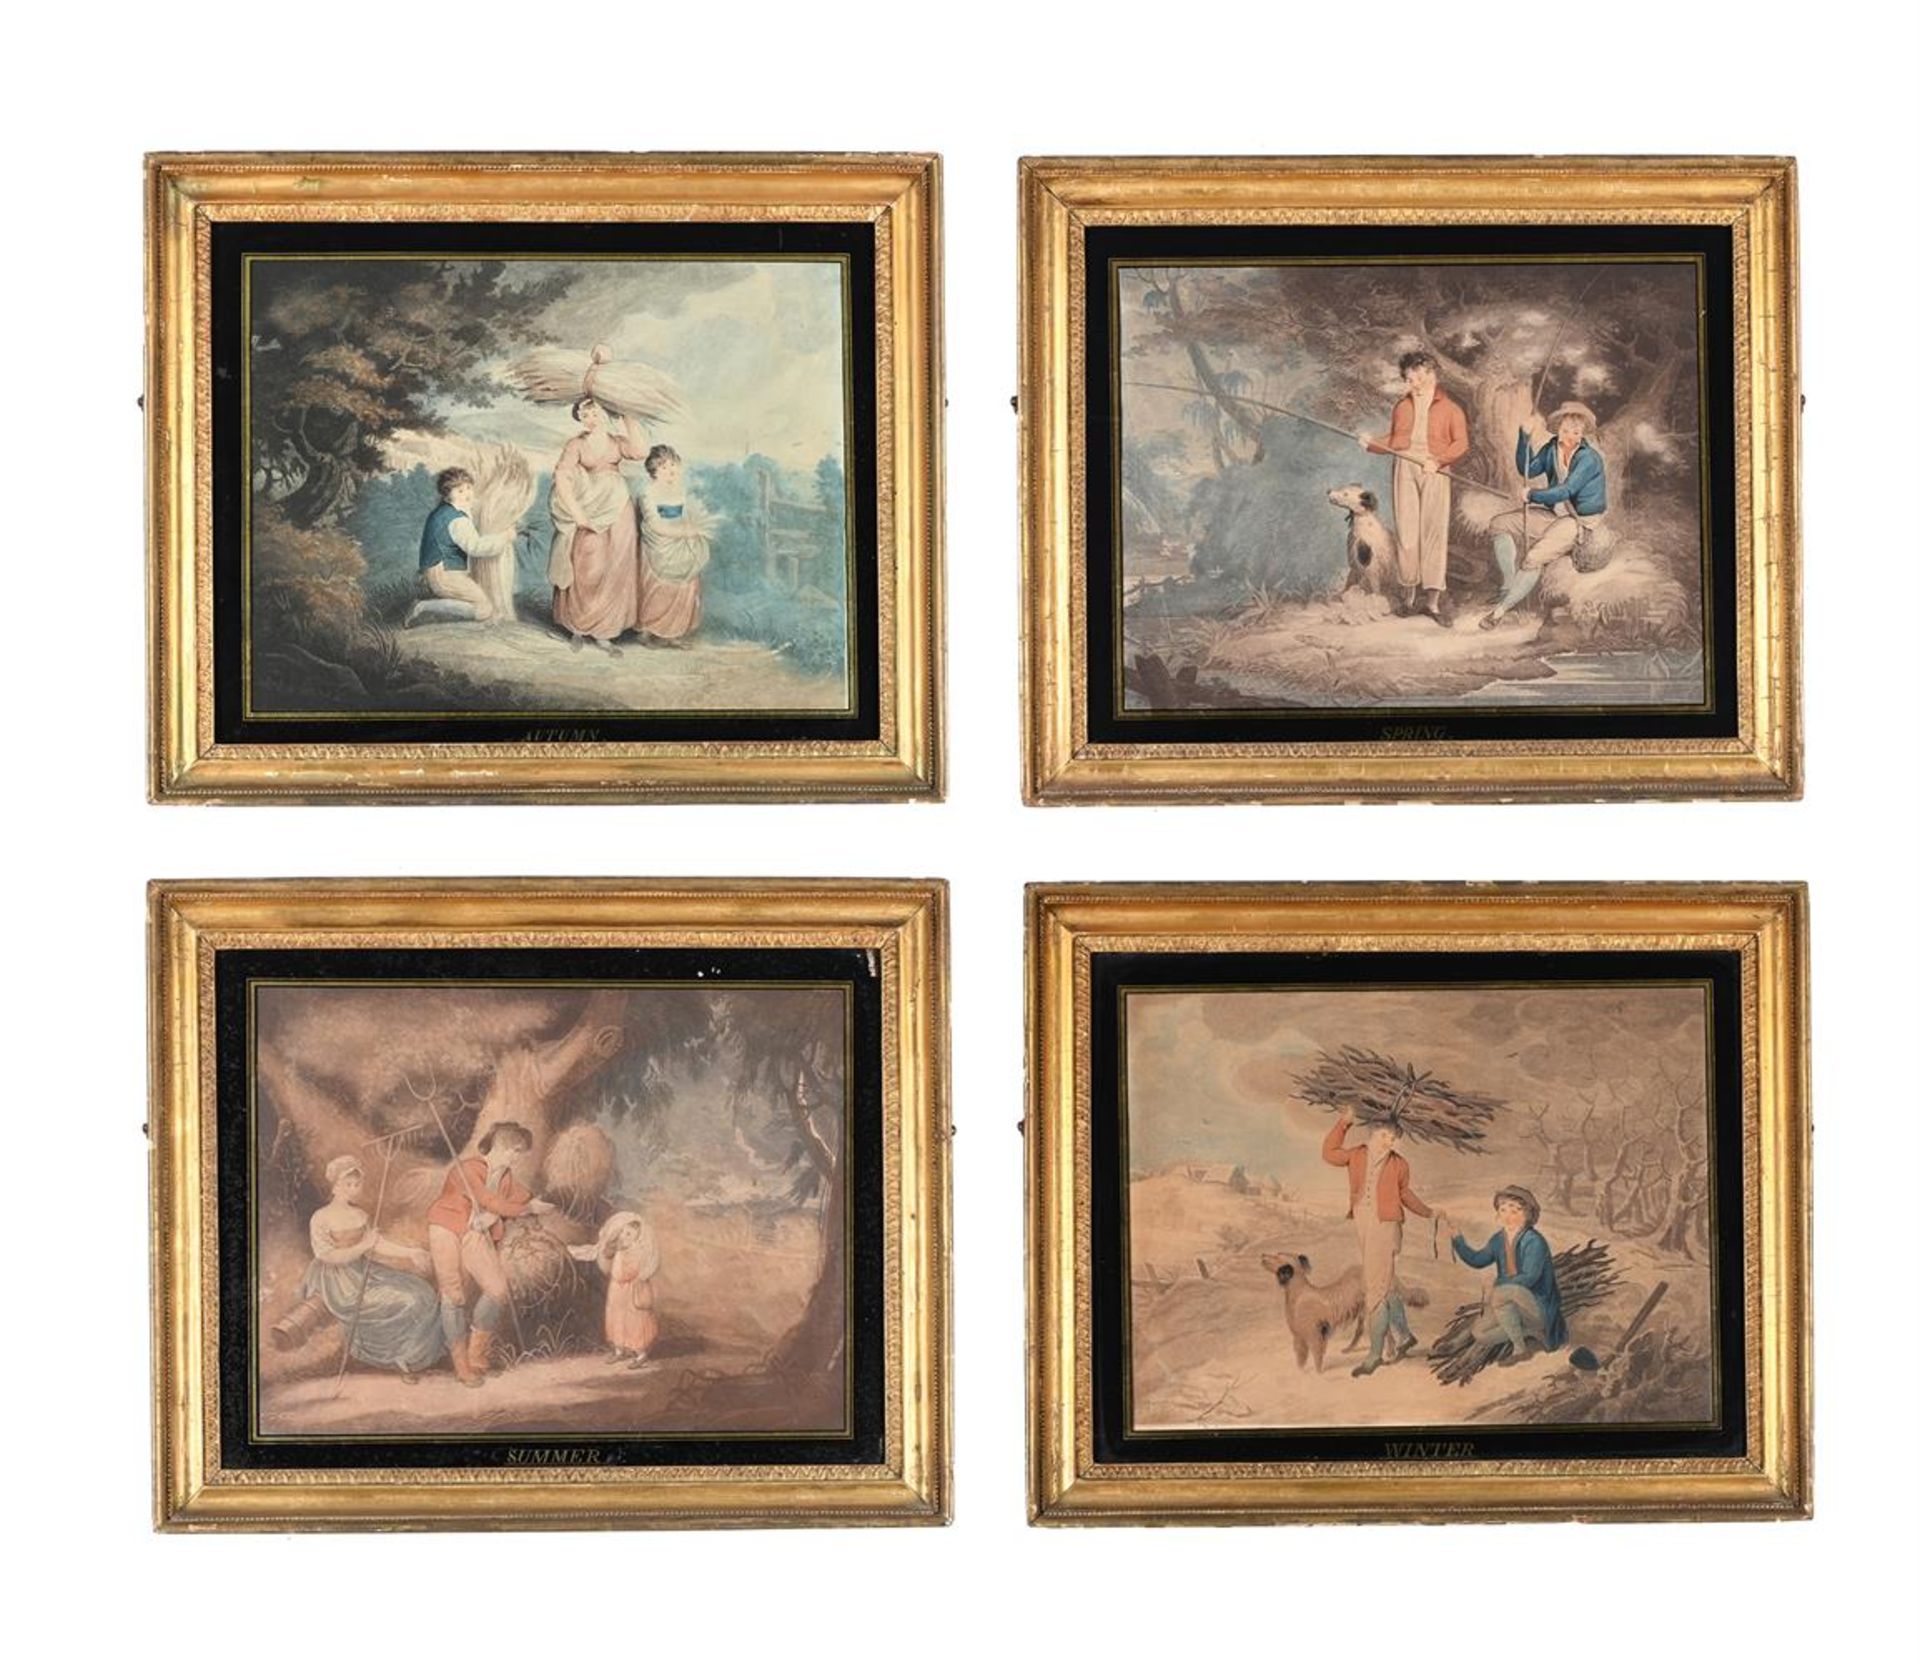 AFTER GEORGE MORLAND, A SET OF FOUR PRINTS DEPICTING THE SEASONS